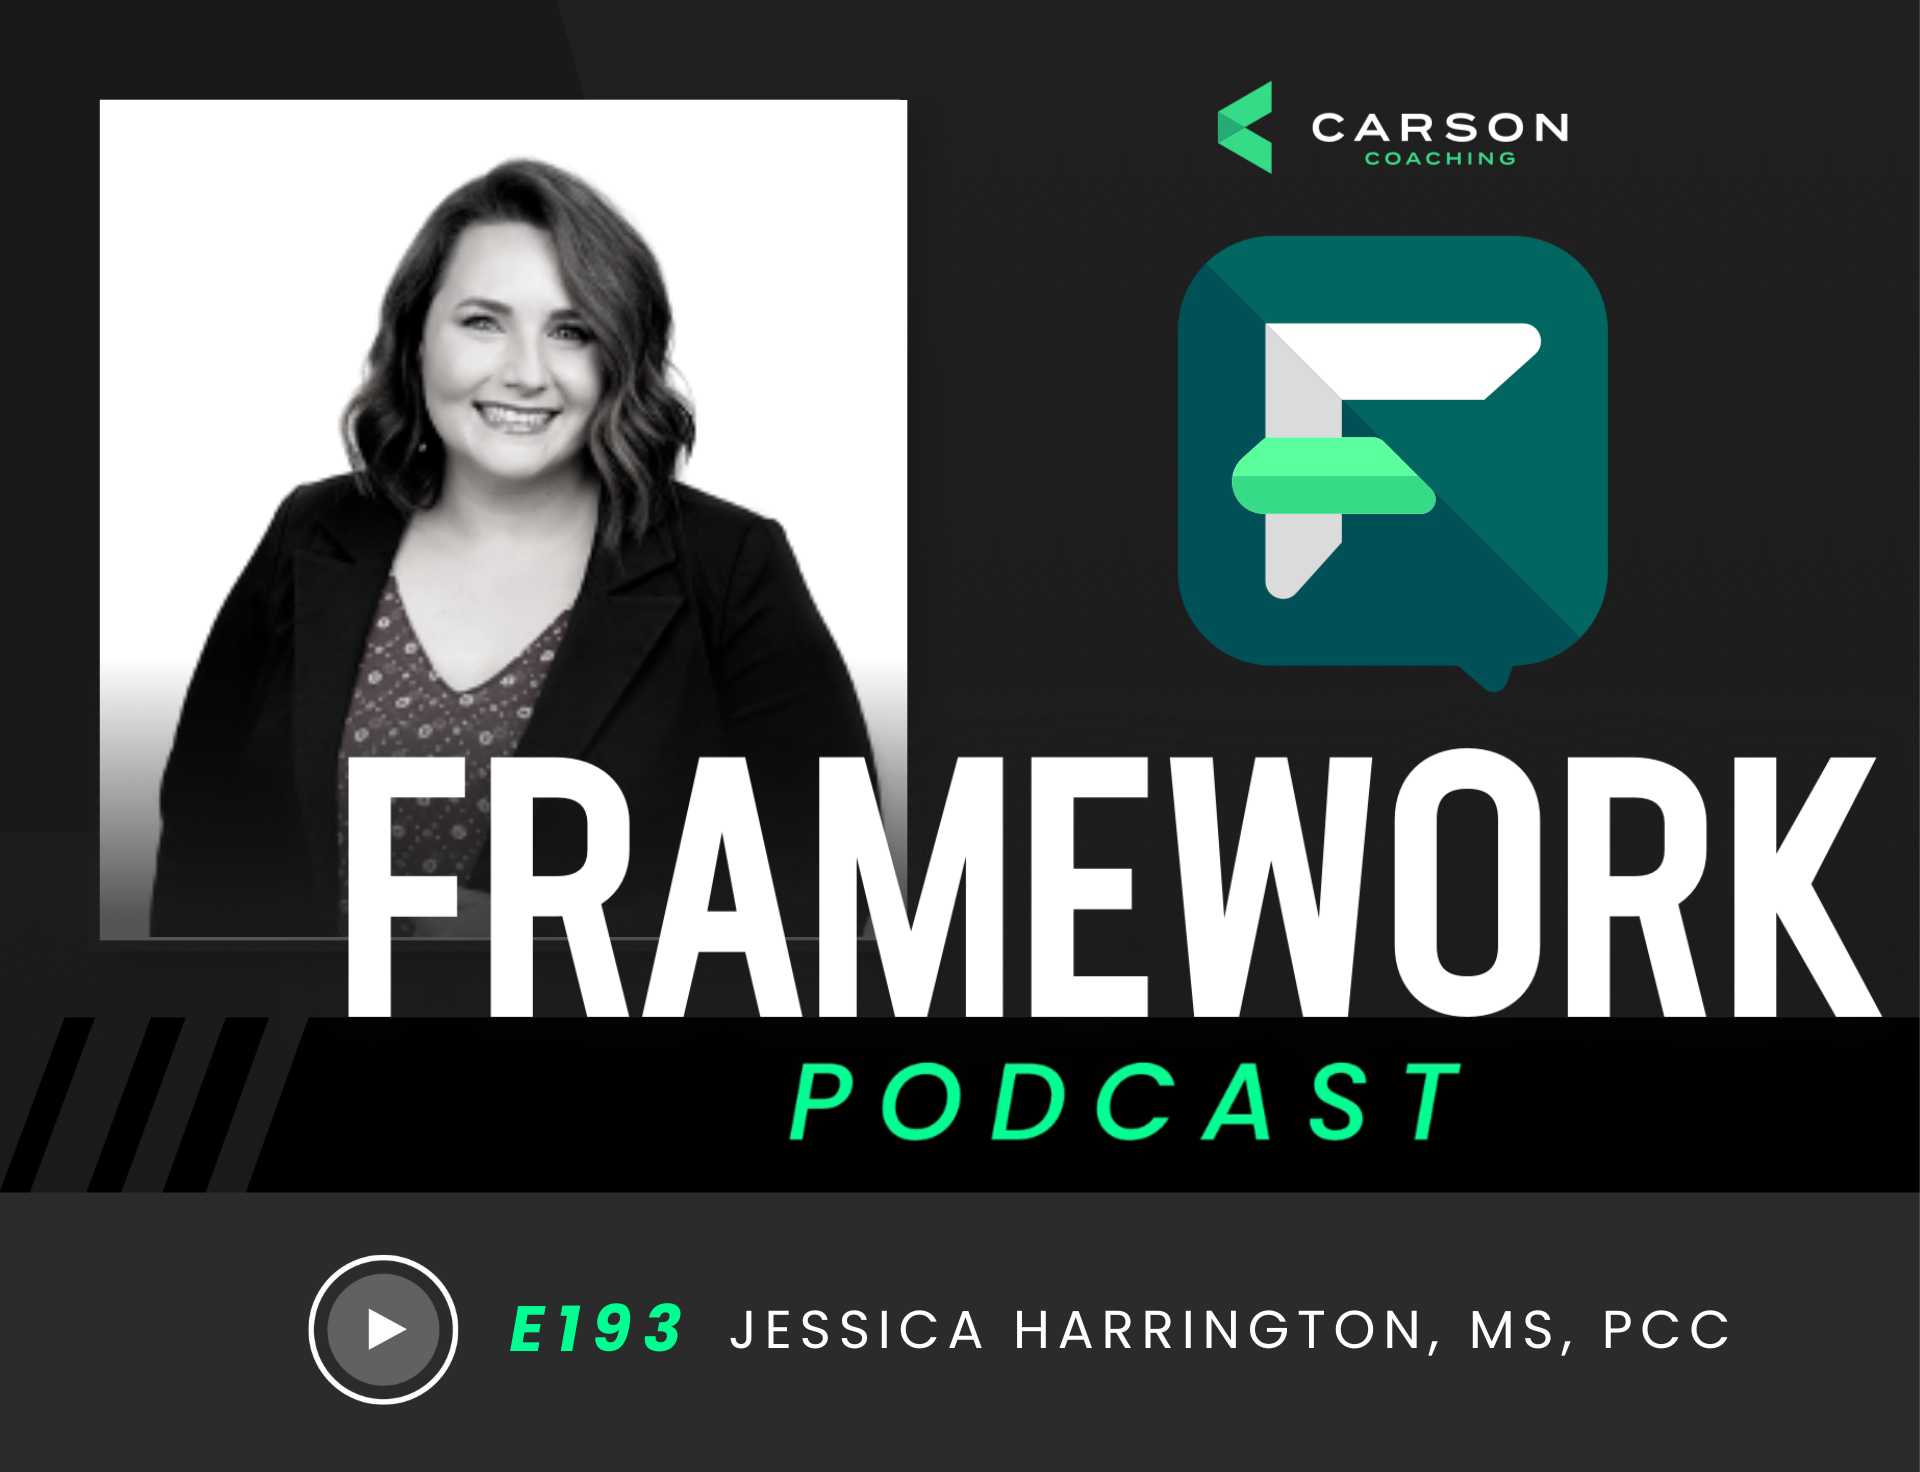 Jessica Harrington: Coaching Advisors and Building Strong Teams